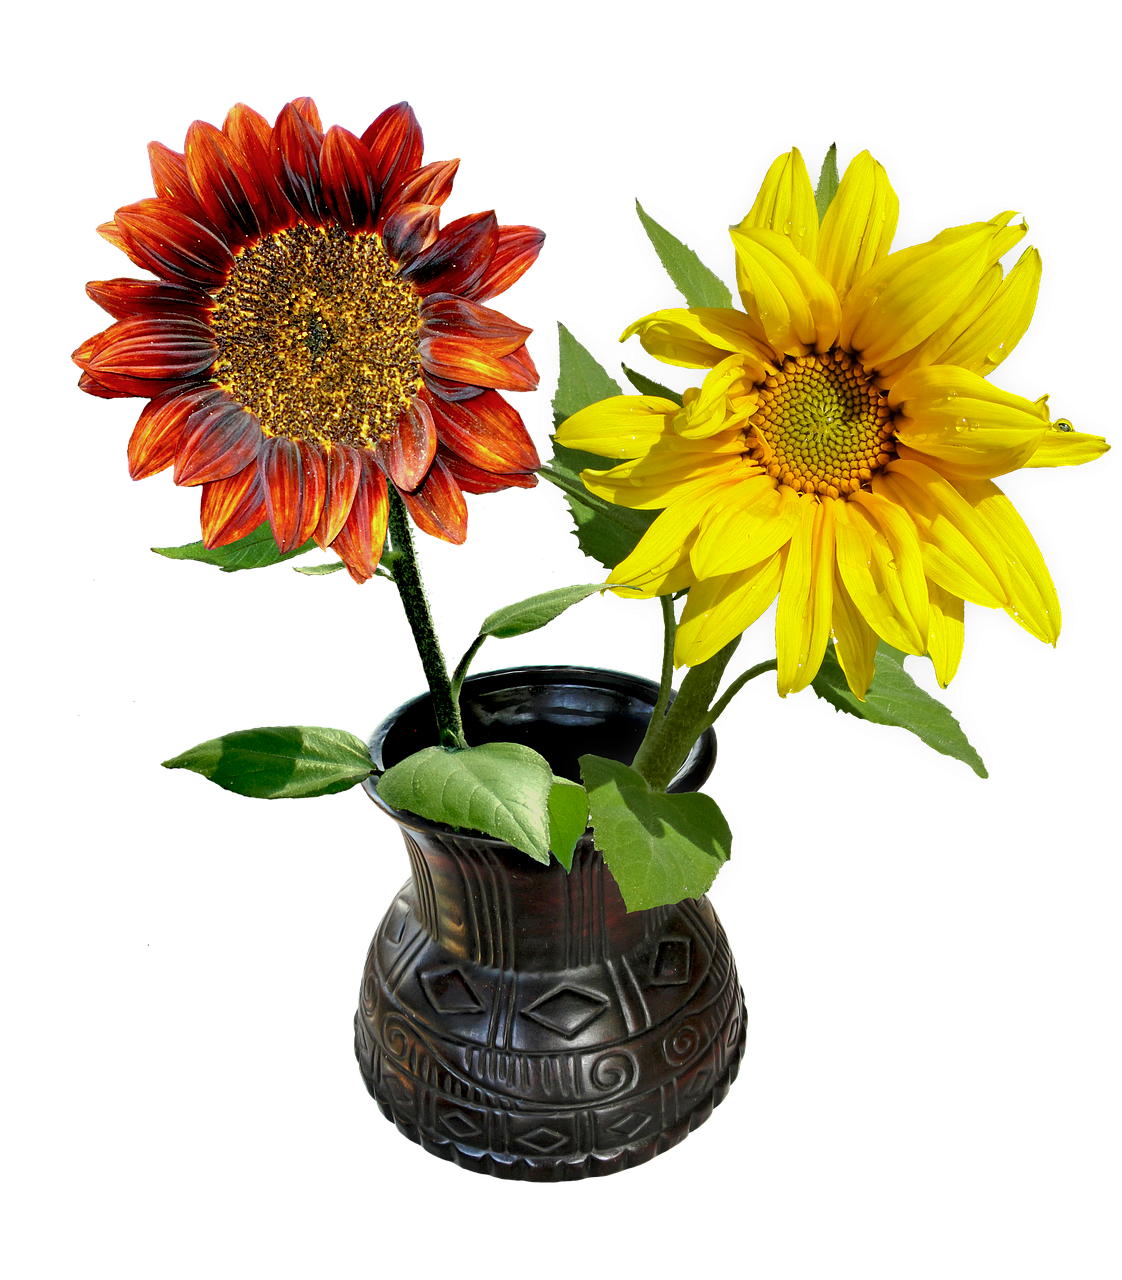 Vase,flowers,sunflowers,vase with flowers,decoration - free image from ...